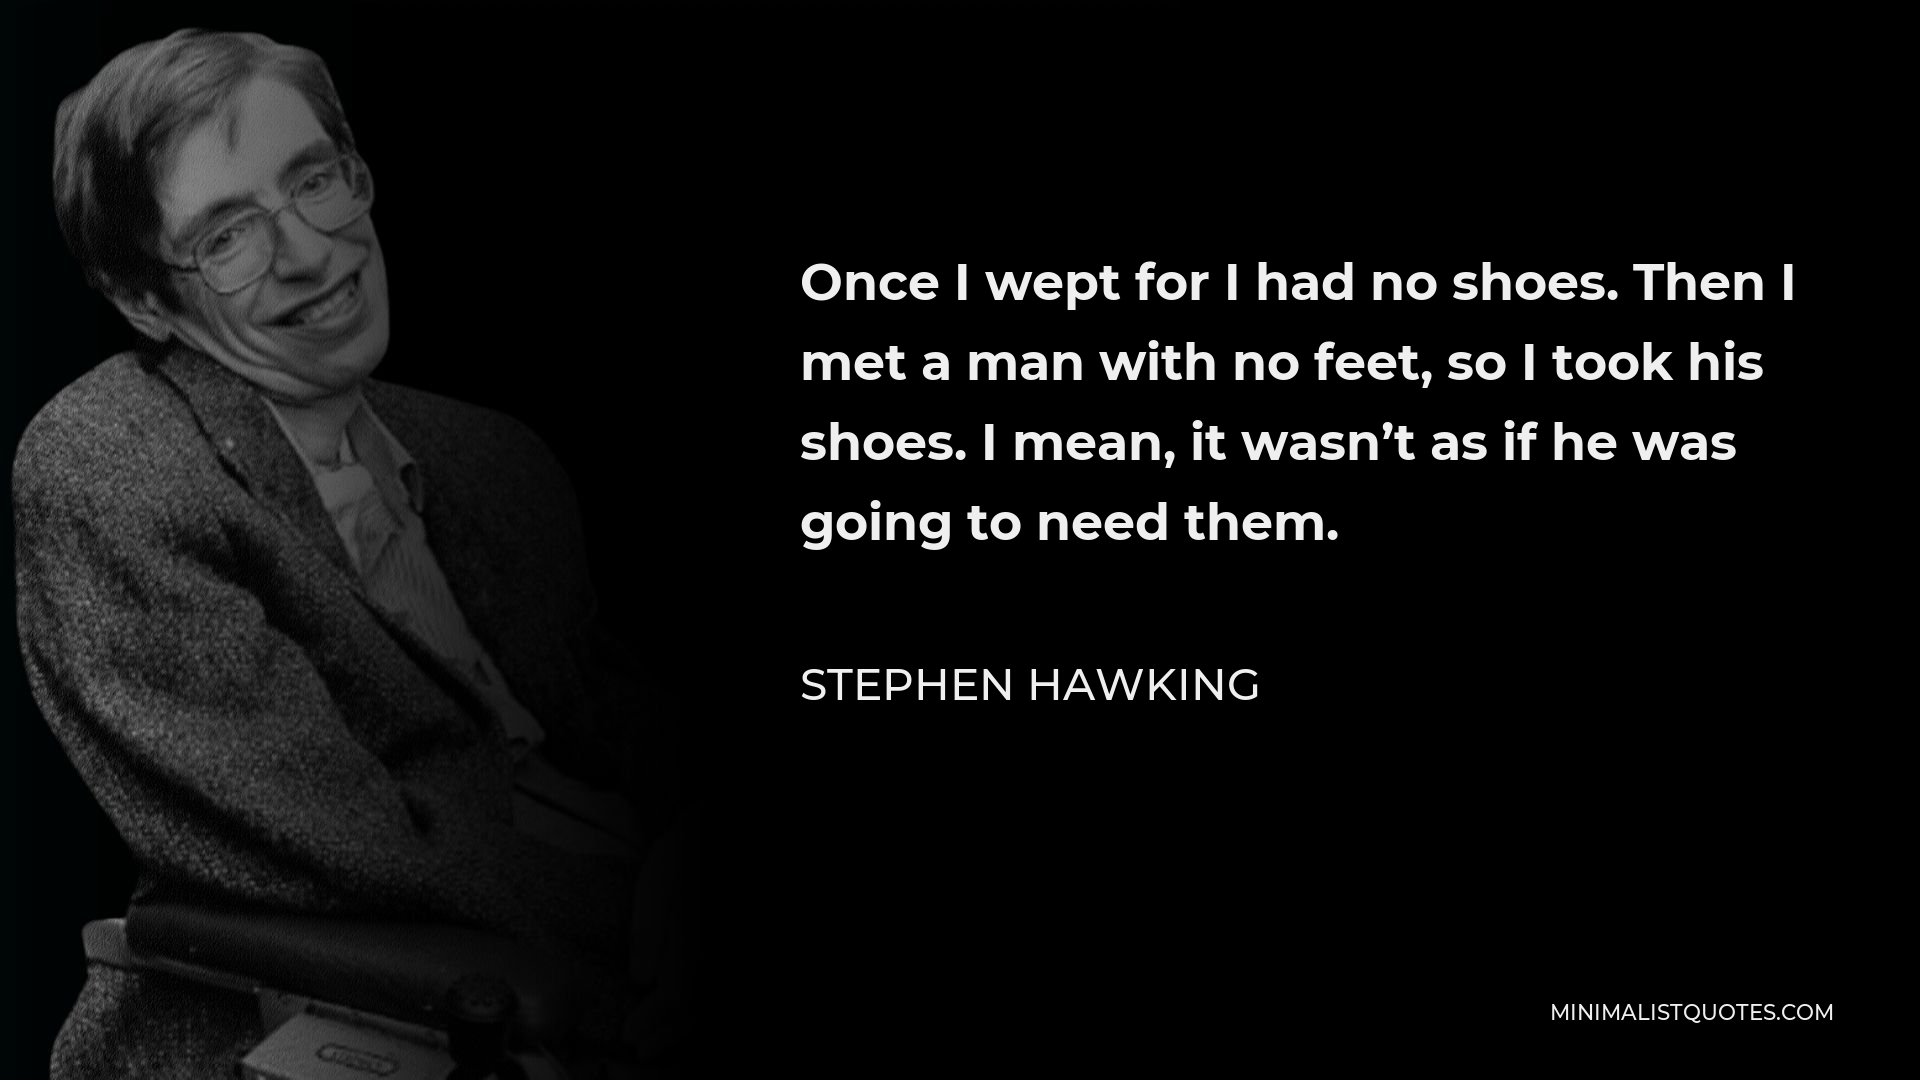 Stephen Hawking Quote - Once I wept for I had no shoes. Then I met a man with no feet, so I took his shoes. I mean, it wasn’t as if he was going to need them.